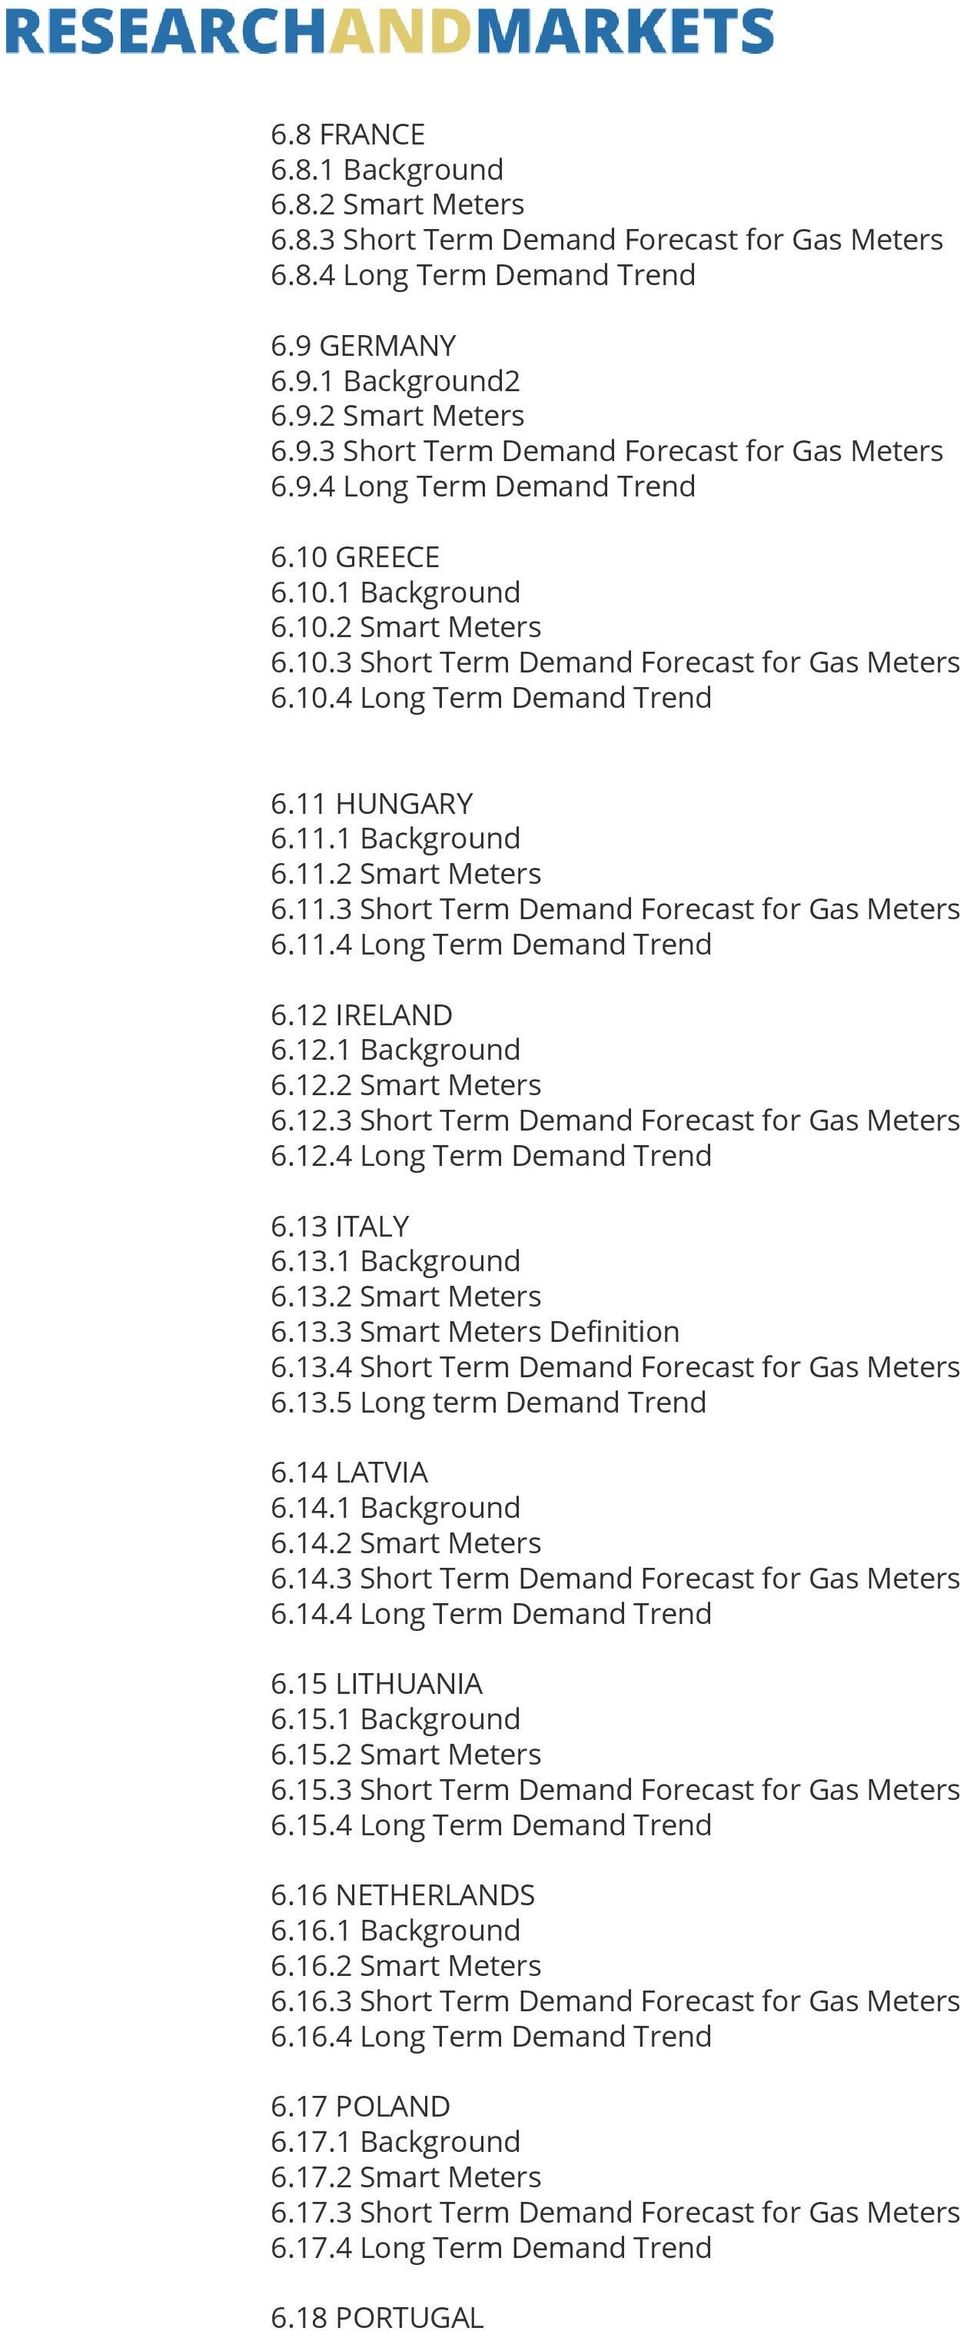 12.1 Background 6.12.2 Smart Meters 6.12.3 Short Term Demand Forecast for Gas Meters 6.12.4 Long Term Demand Trend 6.13 ITALY 6.13.1 Background 6.13.2 Smart Meters 6.13.3 Smart Meters Definition 6.13.4 Short Term Demand Forecast for Gas Meters 6.